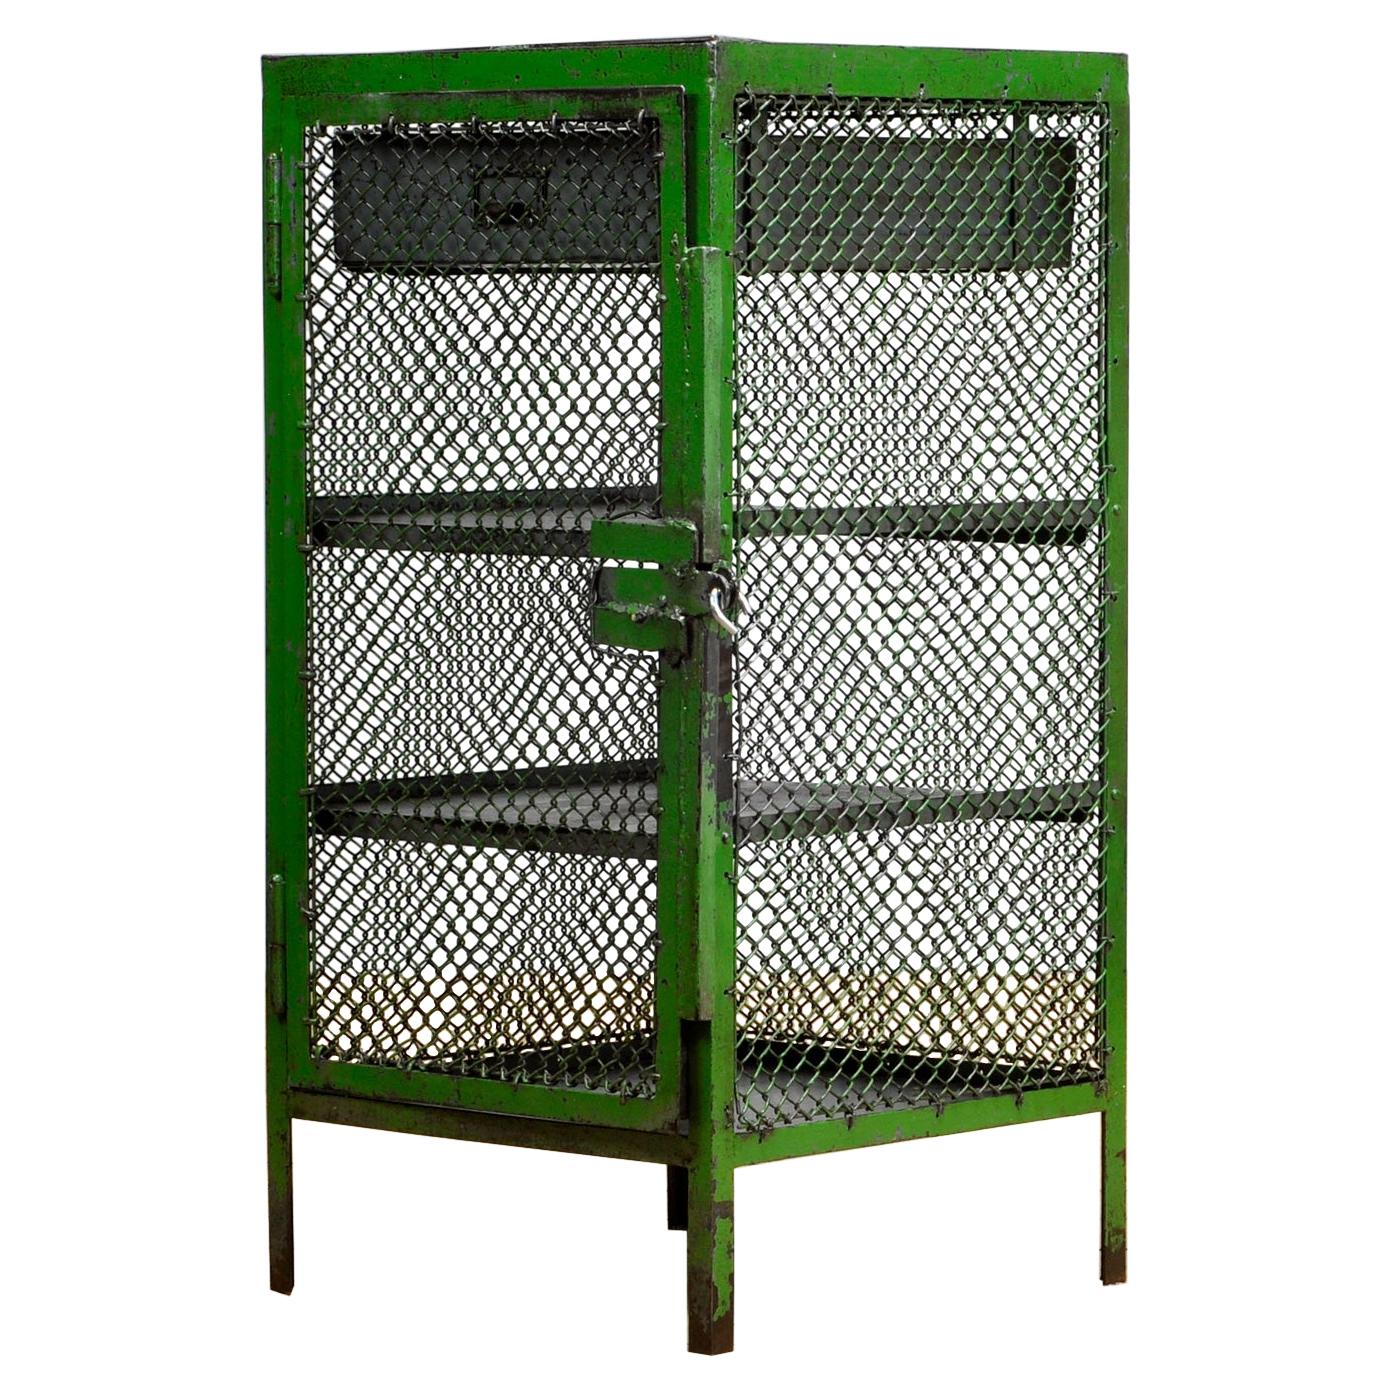 Industrial Iron Cabinet, 1960s For Sale